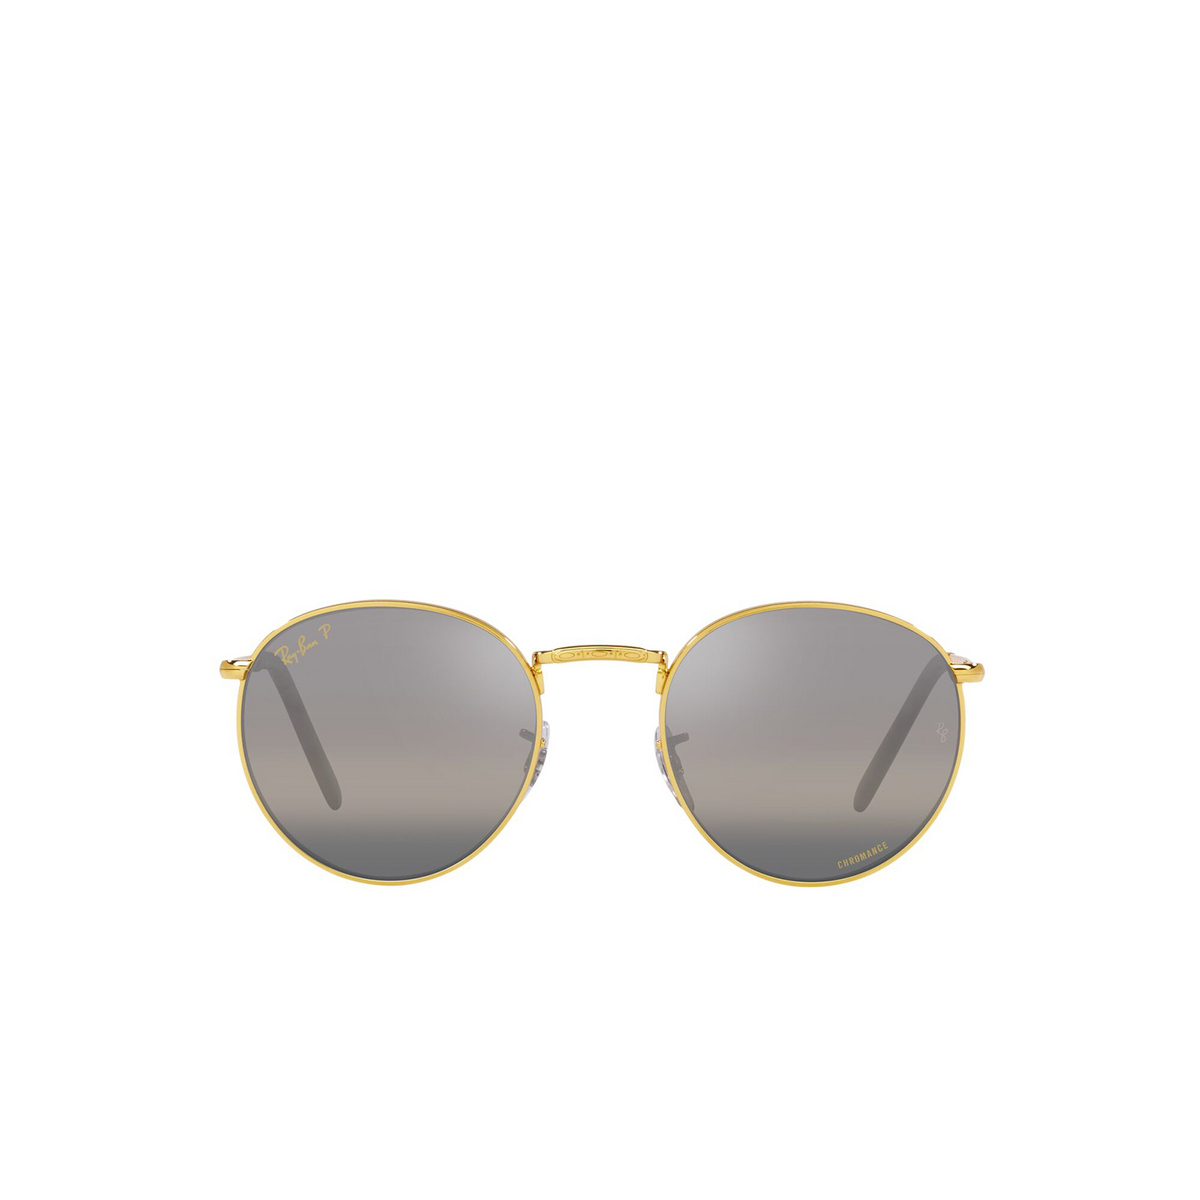 Ray-Ban NEW ROUND Sunglasses 9196G3 Legend Gold - front view